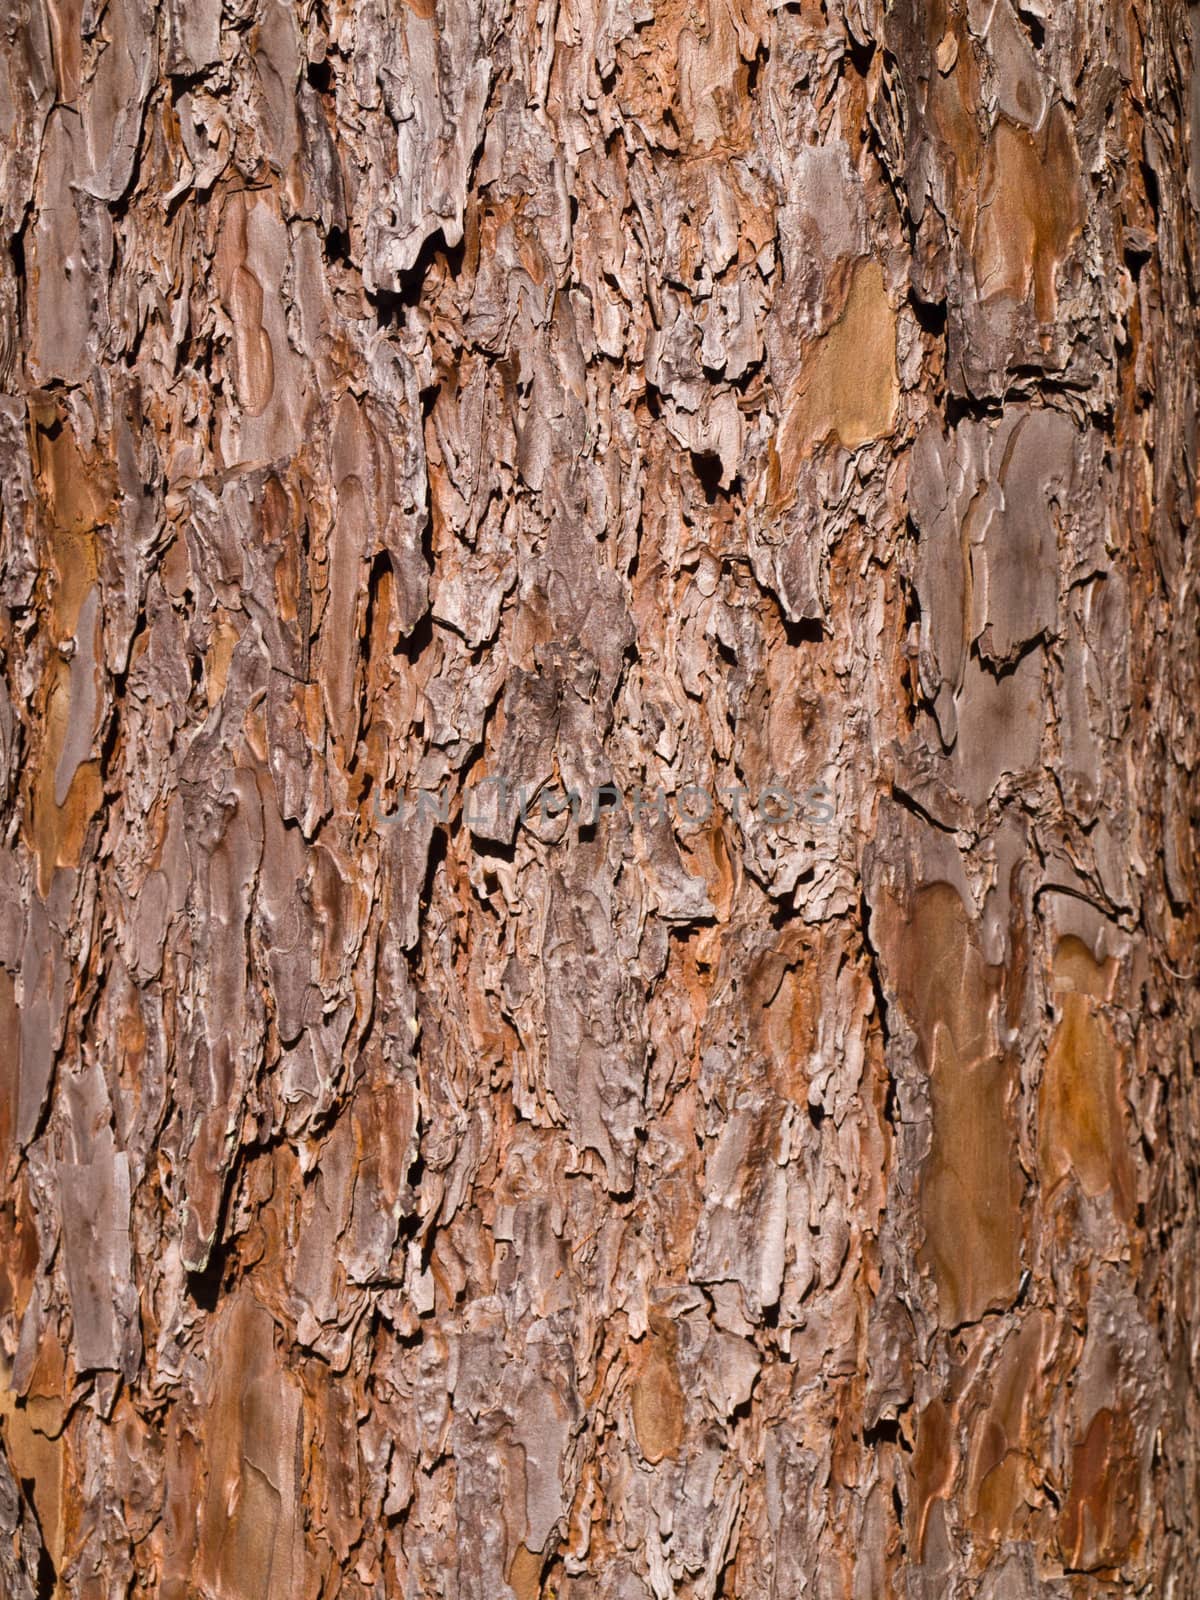 Wooden texture. Close-up view of pine tree.